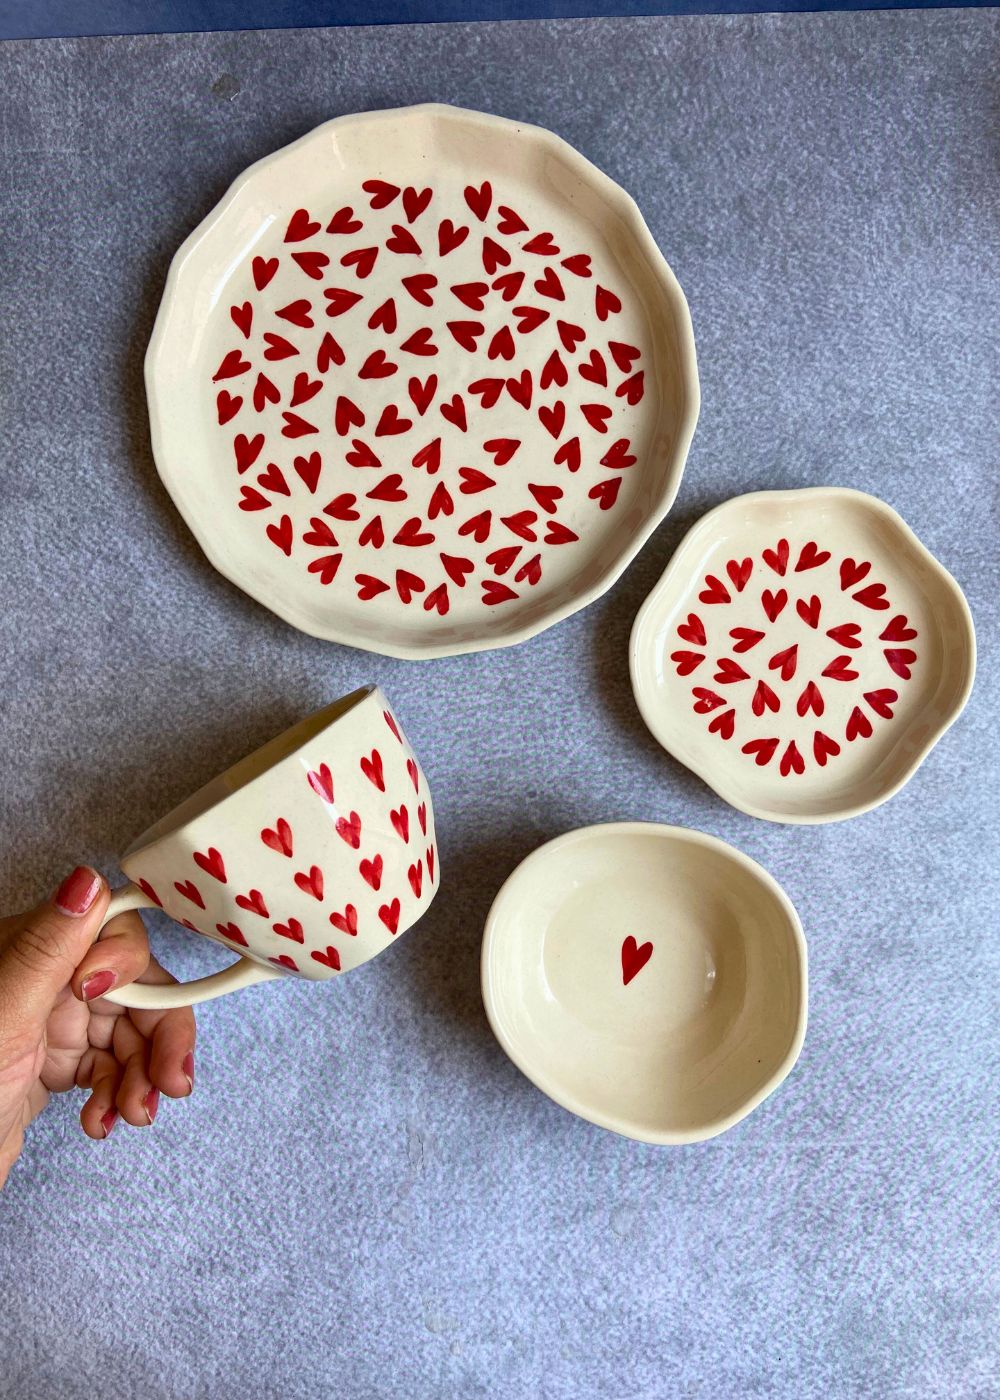 all heart combo made by ceramic 